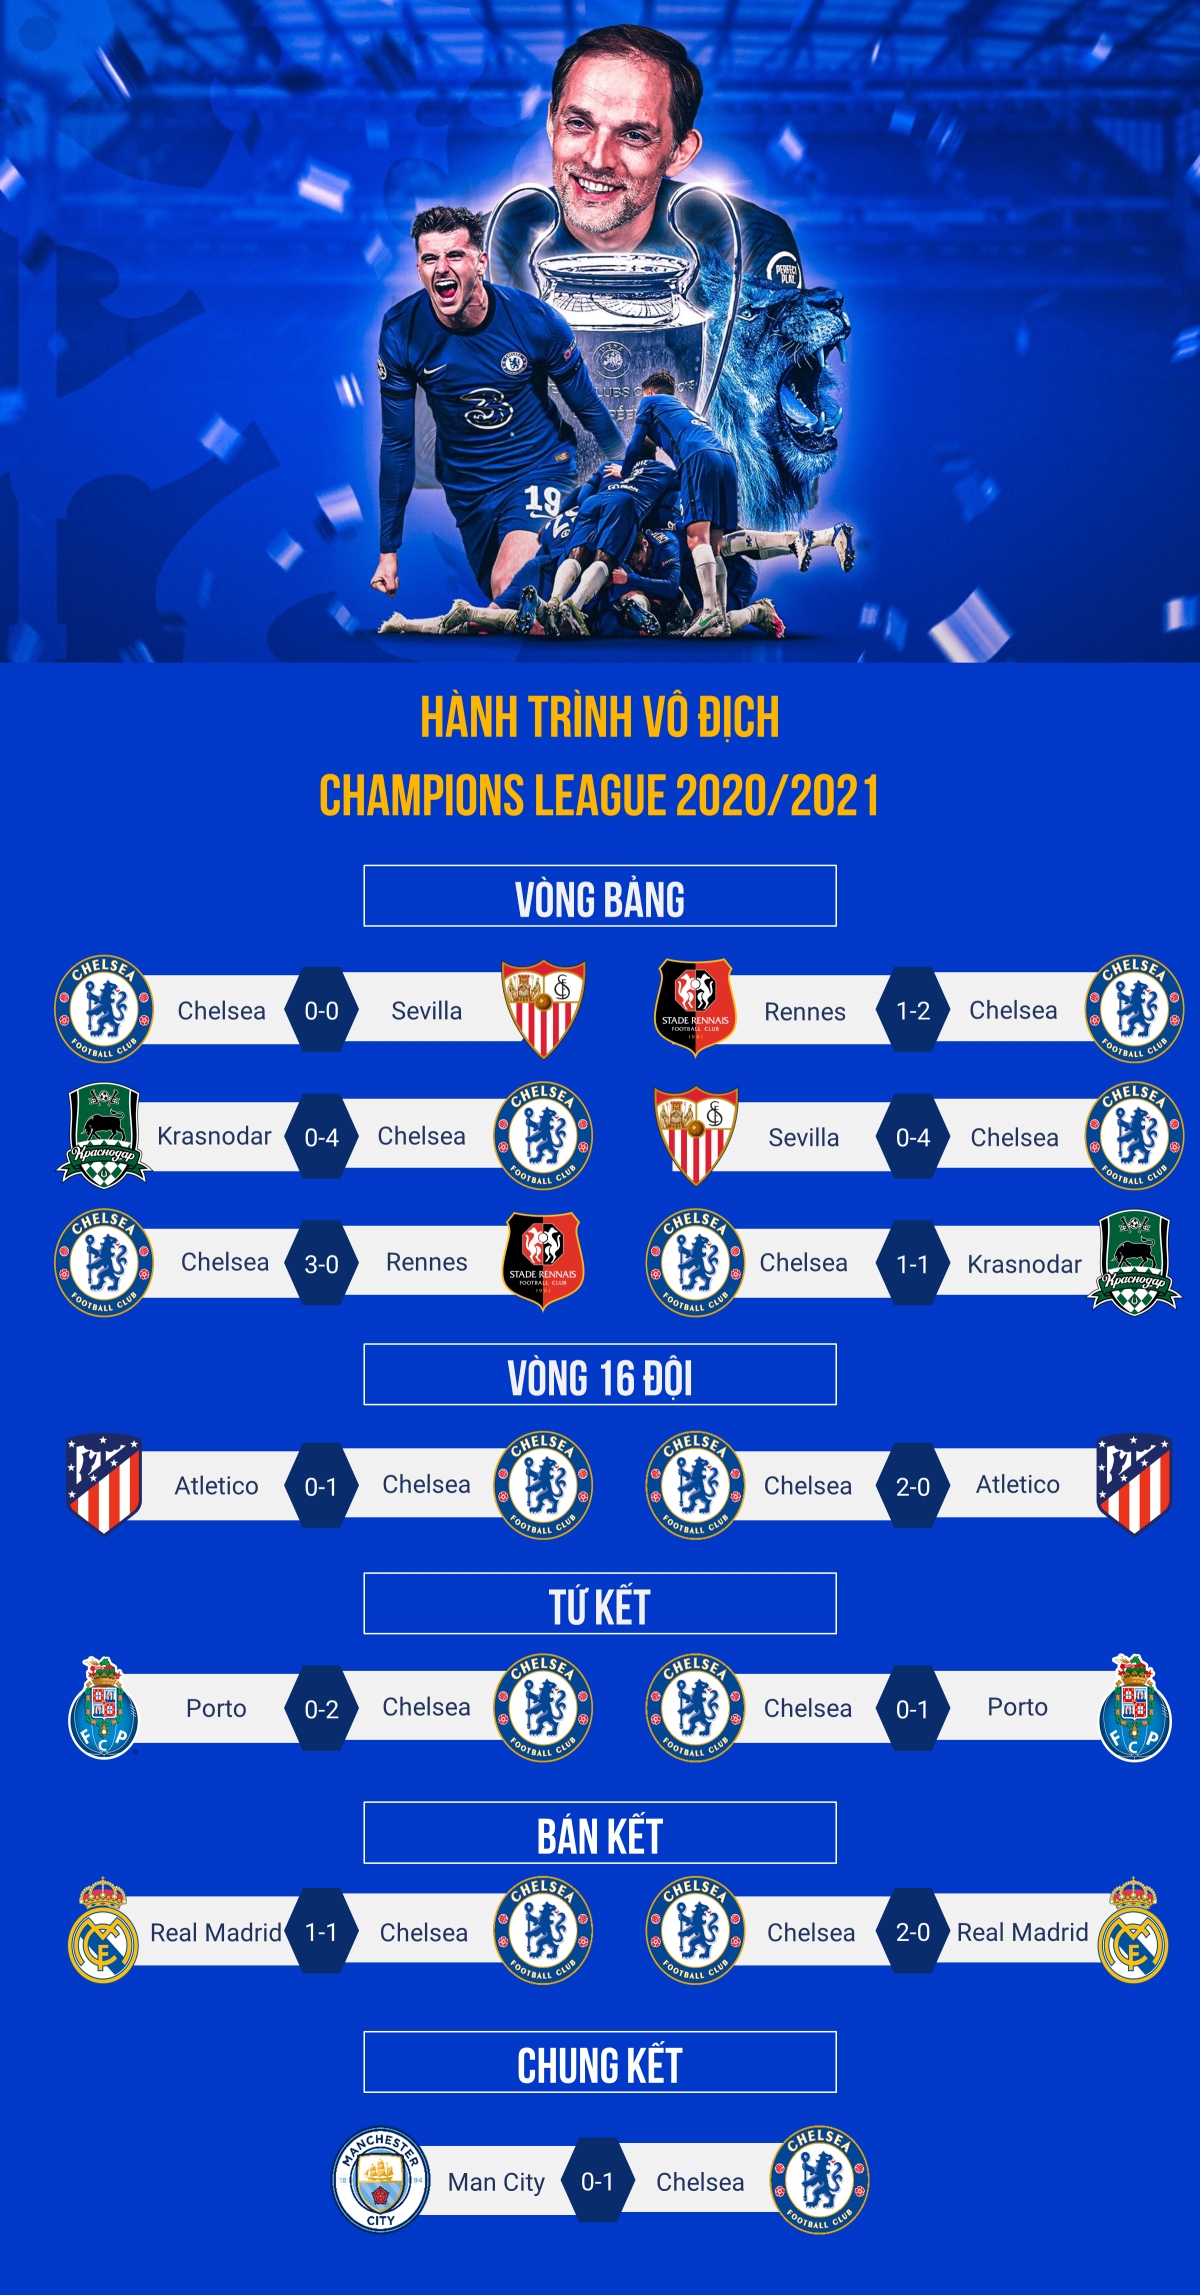 hanh trinh vo dich champions league 2020 2021 cua chelsea hinh anh 1